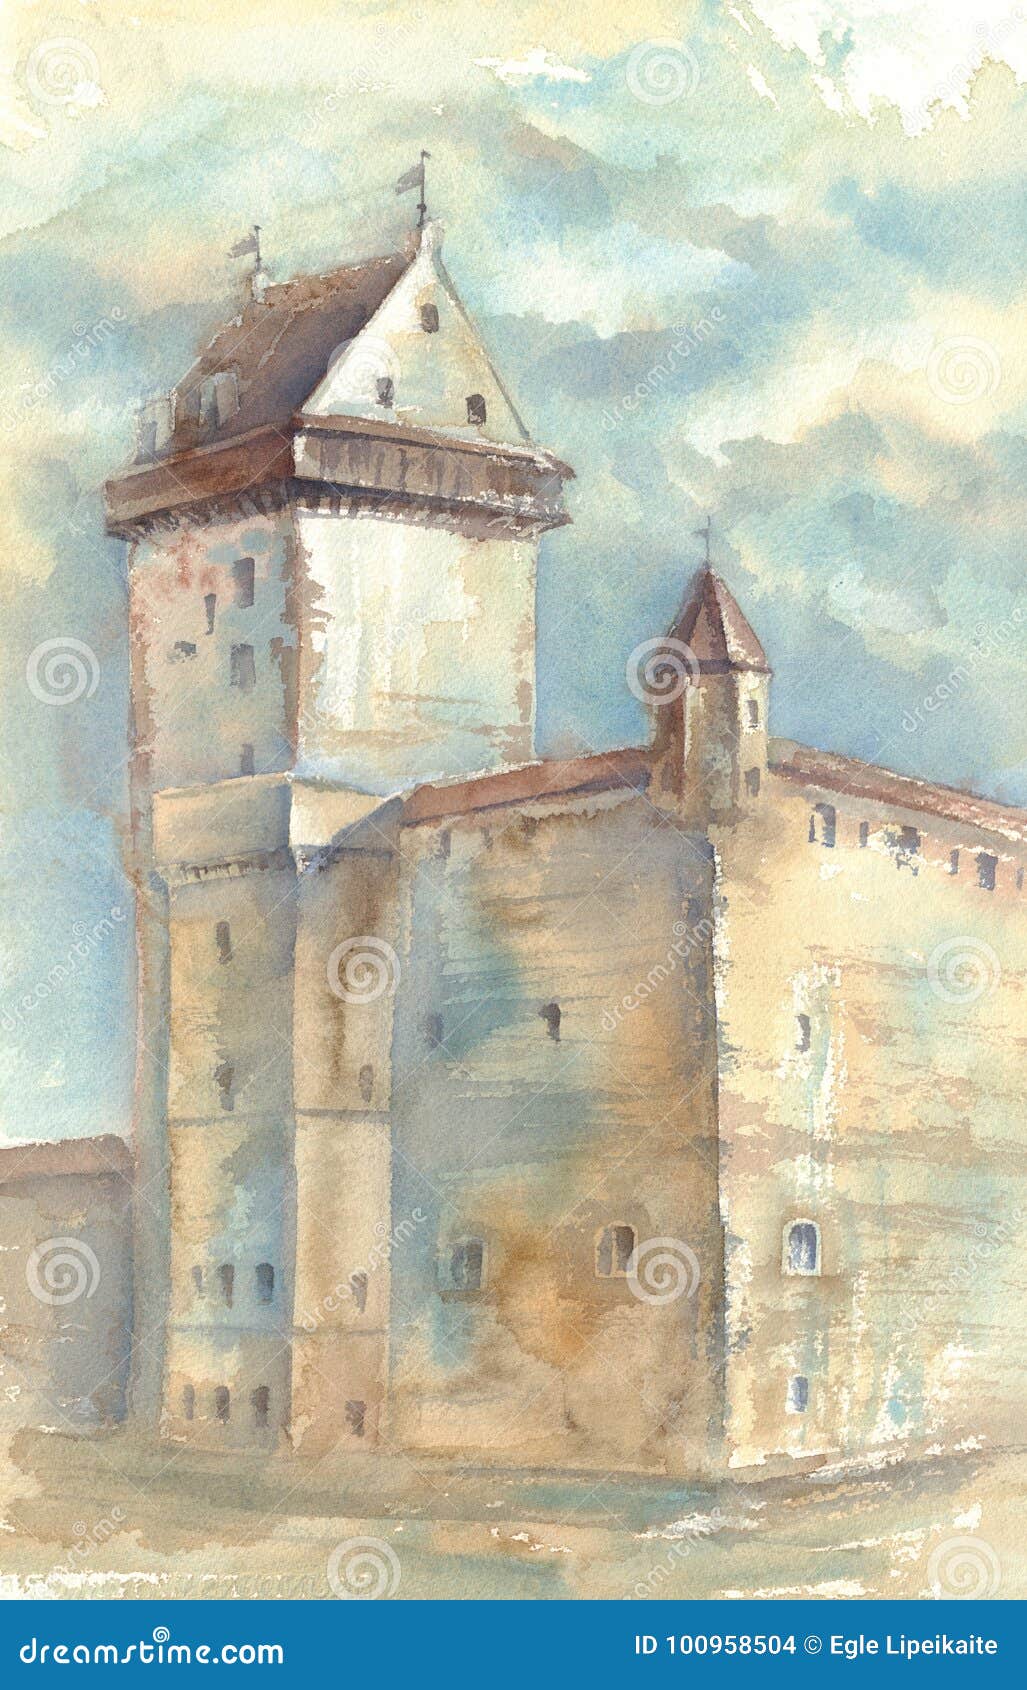 Watercolor Ancient Castles Clipart 8 High Quality JPG Watercolor